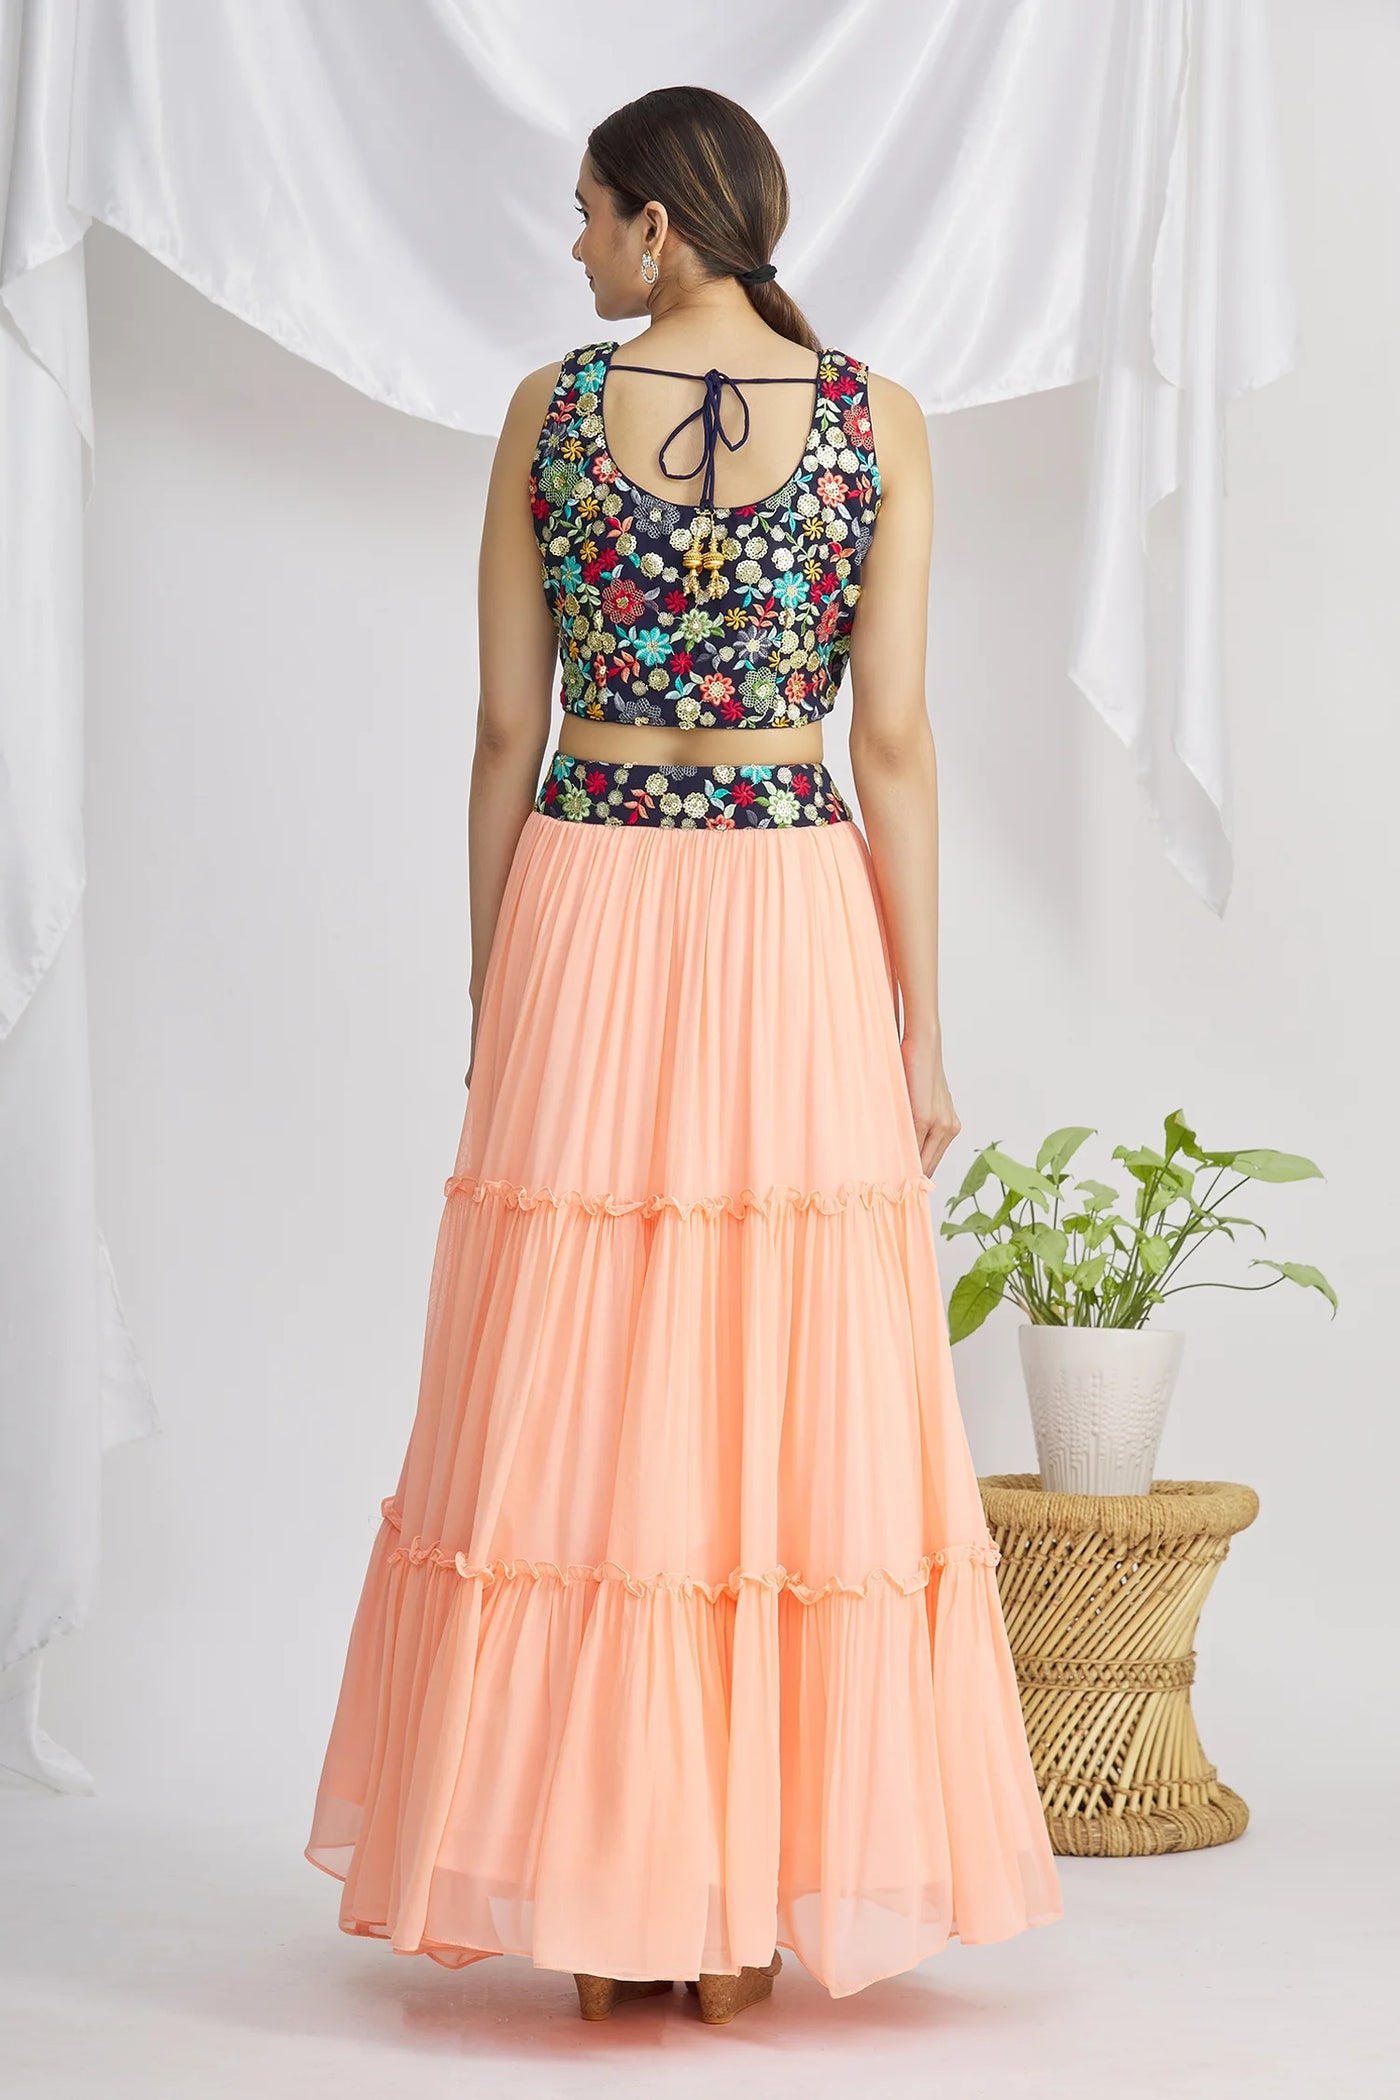 Peach Ruffle Lehenga Set Indian Clothing in Denver, CO, Aurora, CO, Boulder, CO, Fort Collins, CO, Colorado Springs, CO, Parker, CO, Highlands Ranch, CO, Cherry Creek, CO, Centennial, CO, and Longmont, CO. NATIONWIDE SHIPPING USA- India Fashion X